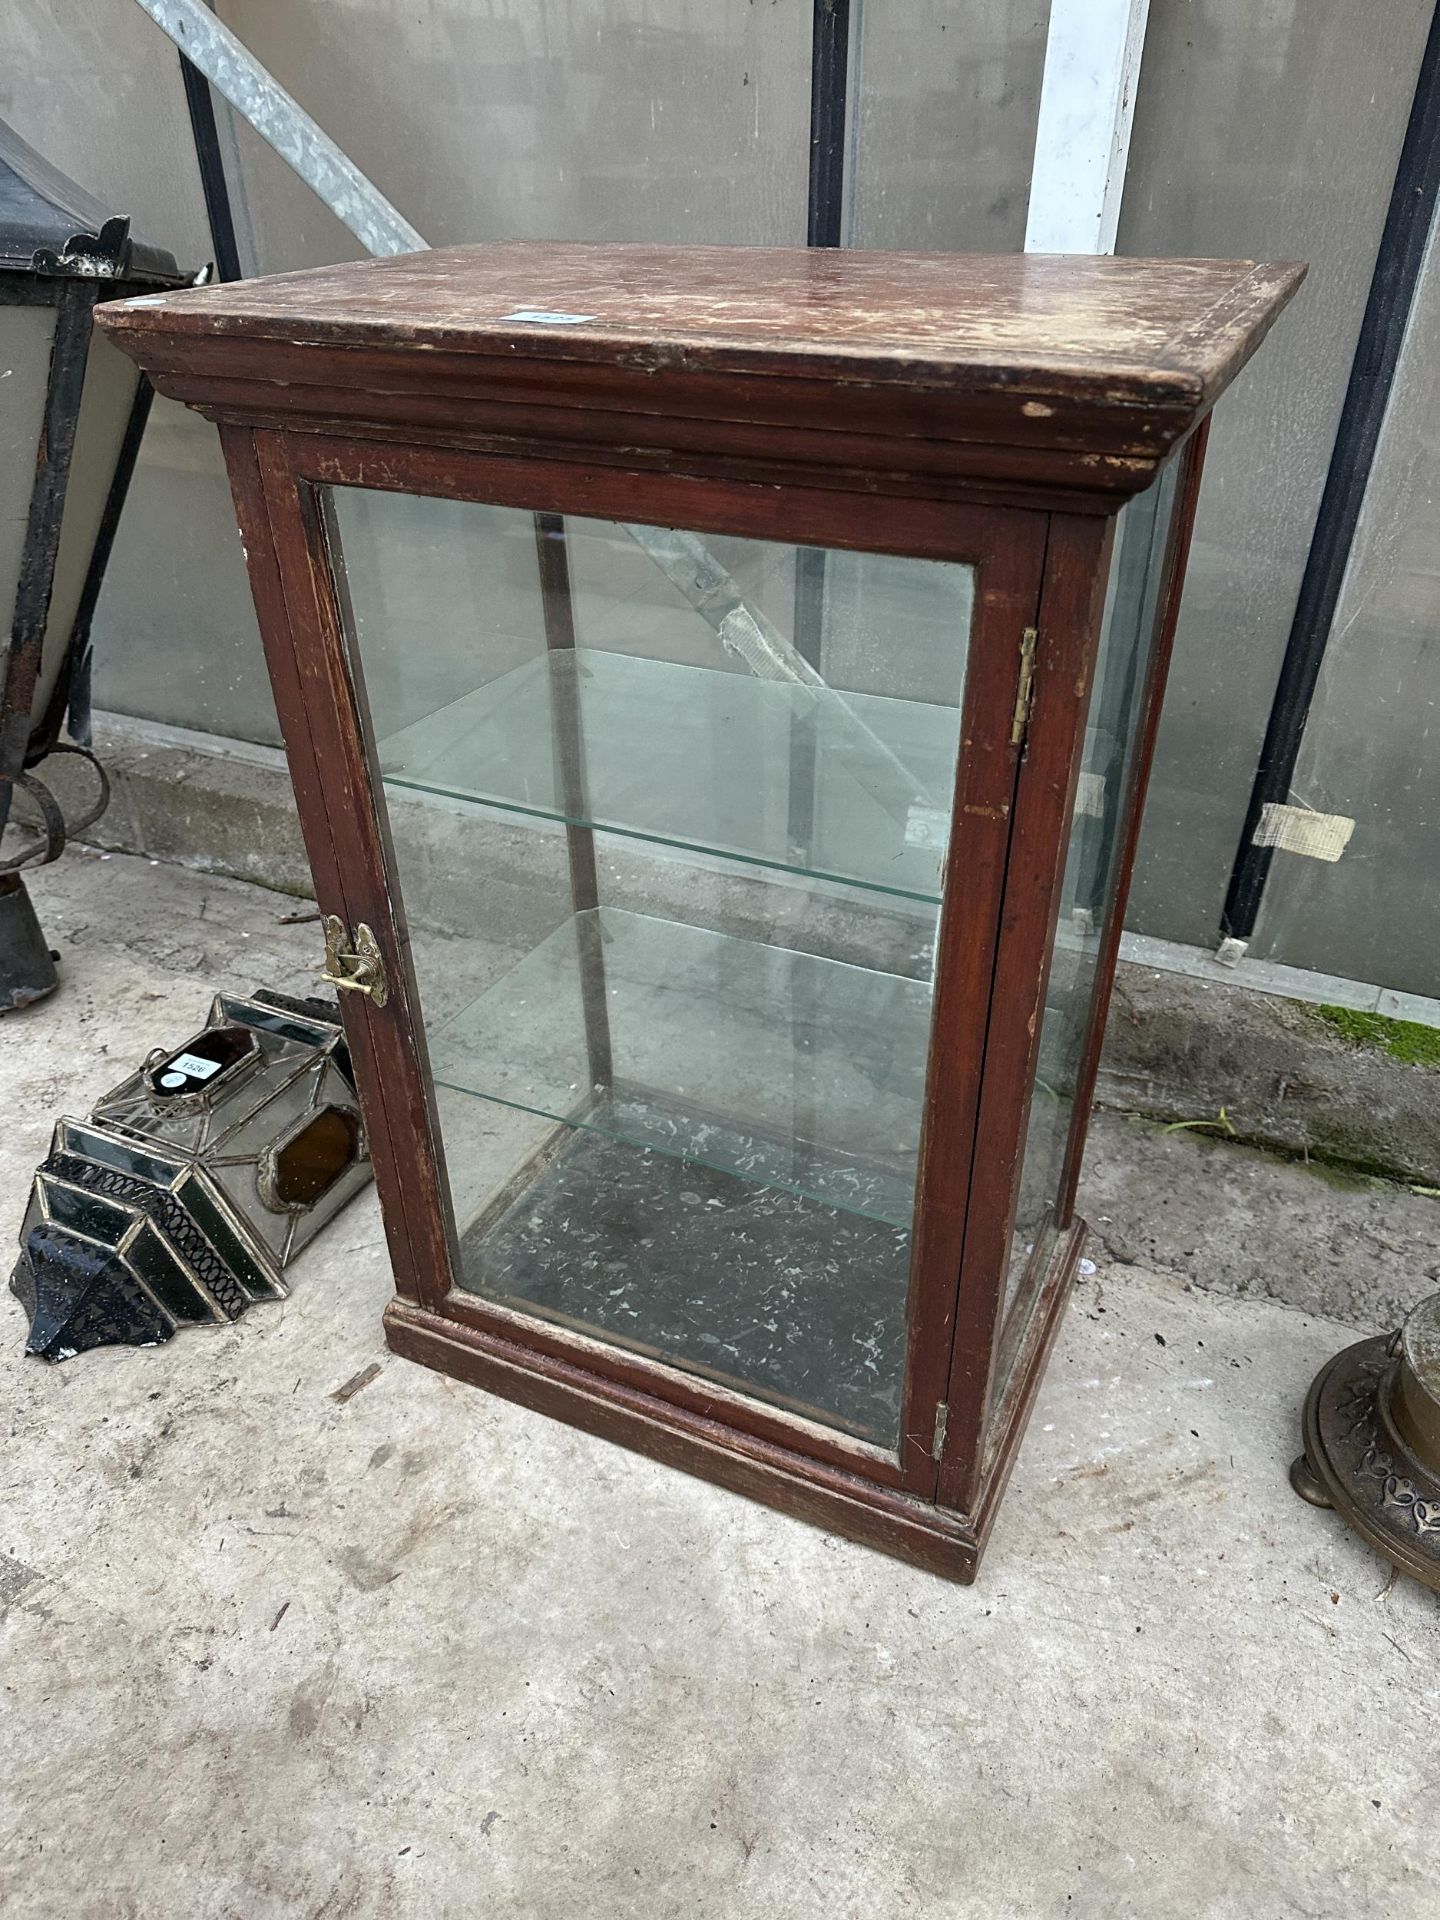 AN EARLY 20TH CENTURY OAK AND GLASS SHOP DISPLAY CABINET